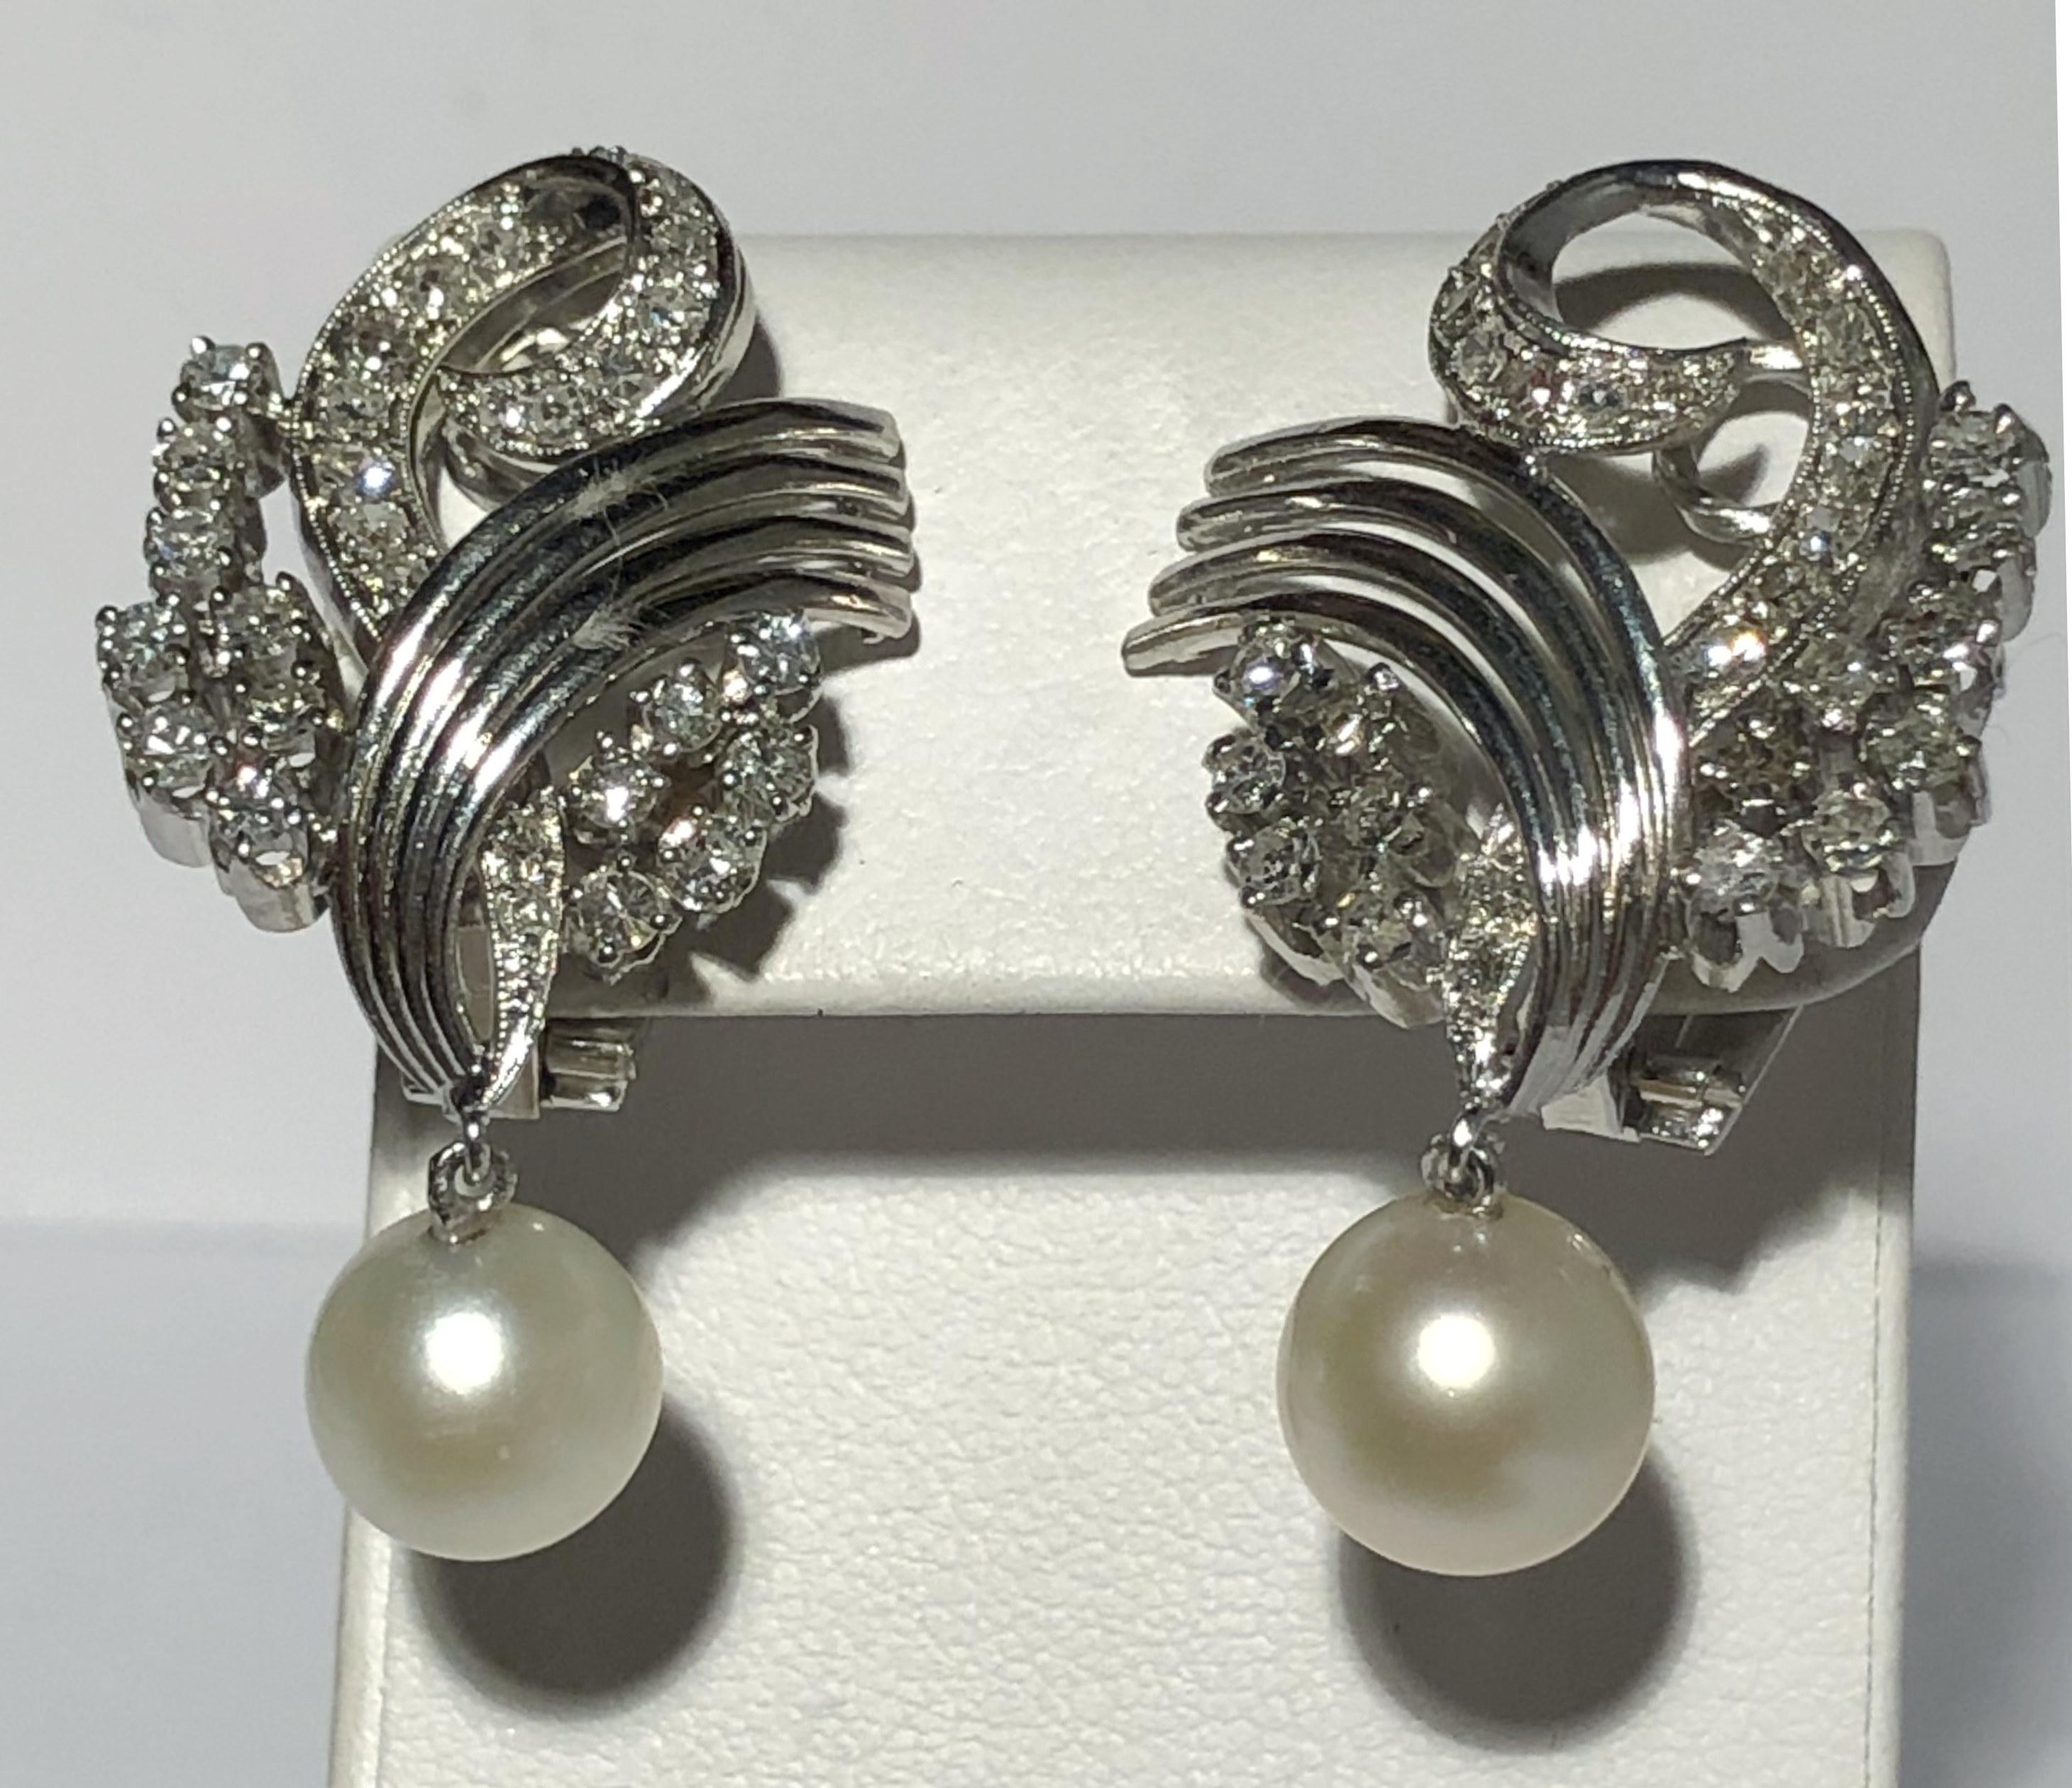 Pair of vintage volute shaped platinum earrings with brilliant diamonds and large pearls of 0.85cm, Italy 1930s